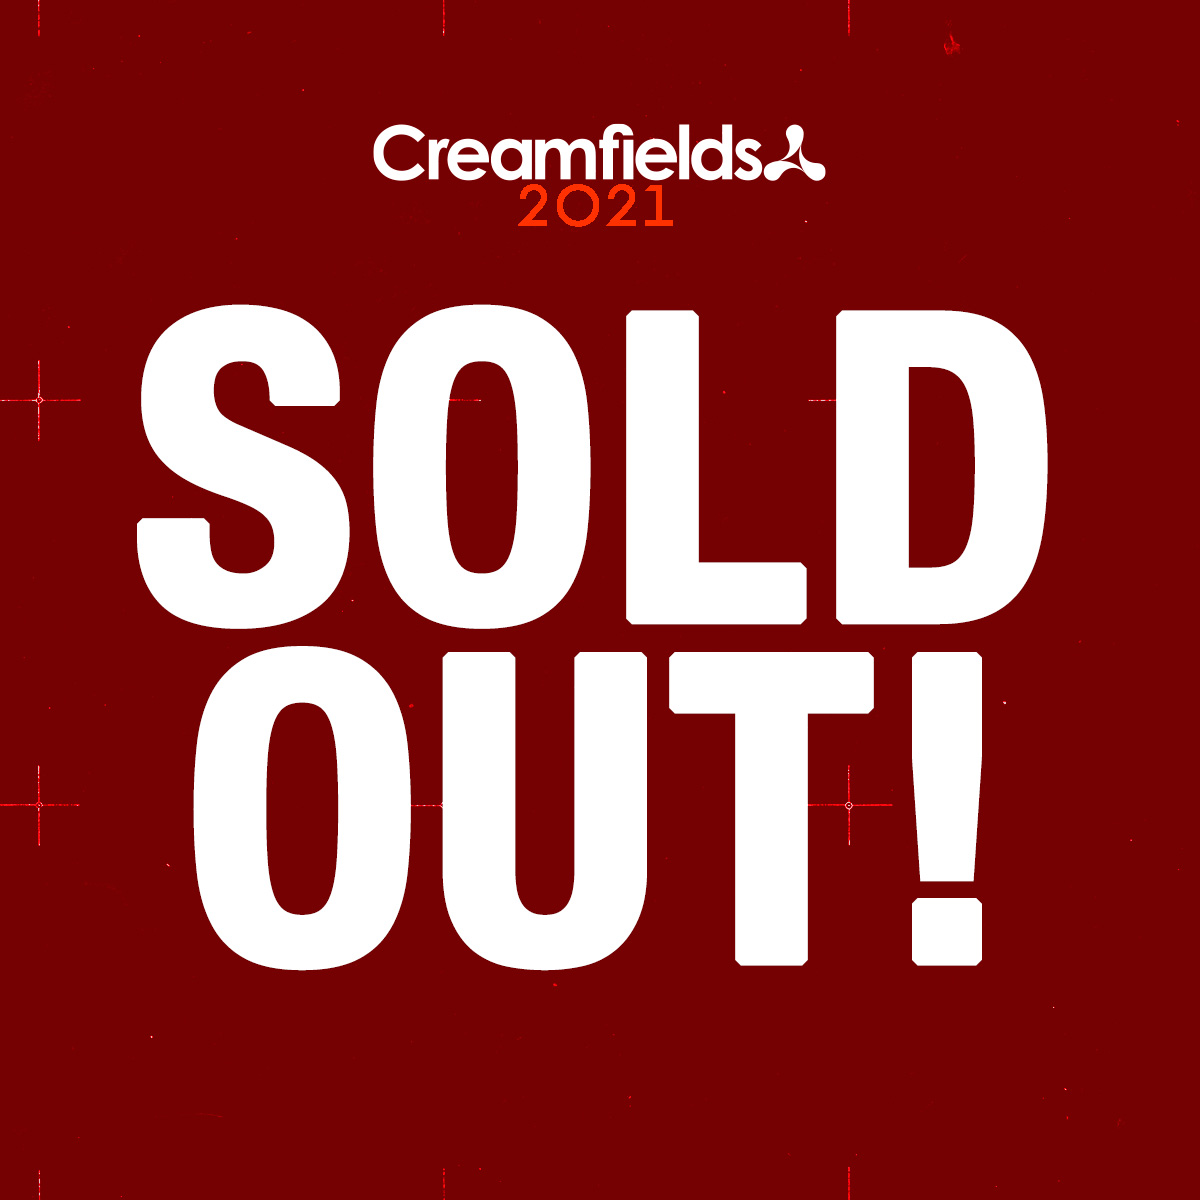 Creamfields 2021 Sells Out in Record Time